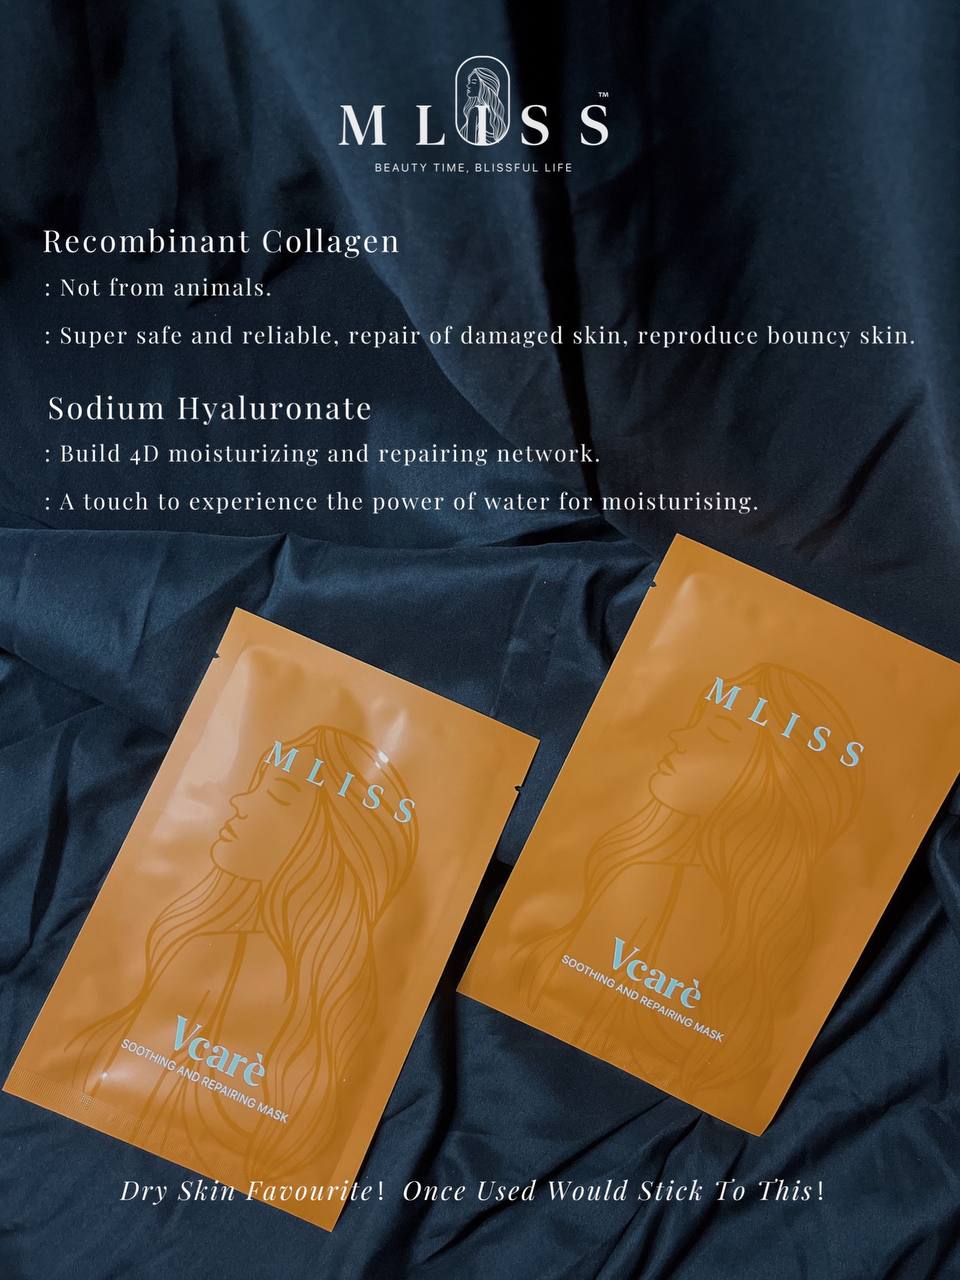 MLISS Vcare Soothing and Repairing Mask